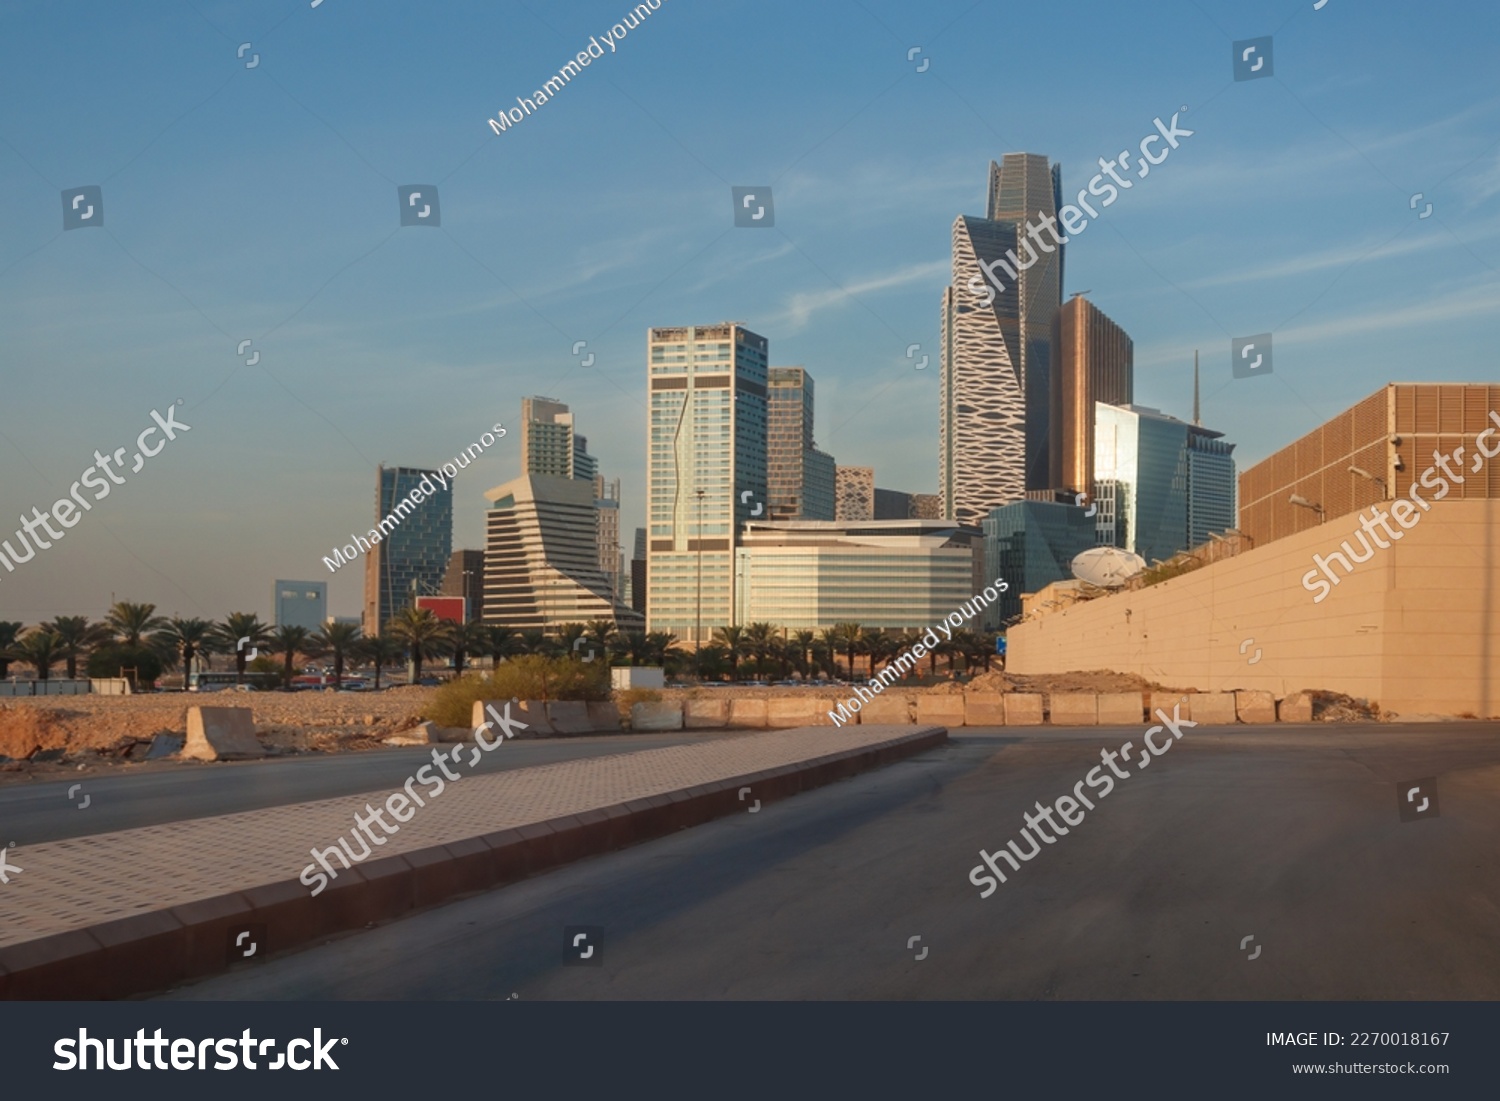 Riyadh roads and streets are filled with ornamental trees on both sides of the road, downtown, Riyadh skyline, King Abdullah Financial District, Saudi Arabia #2270018167